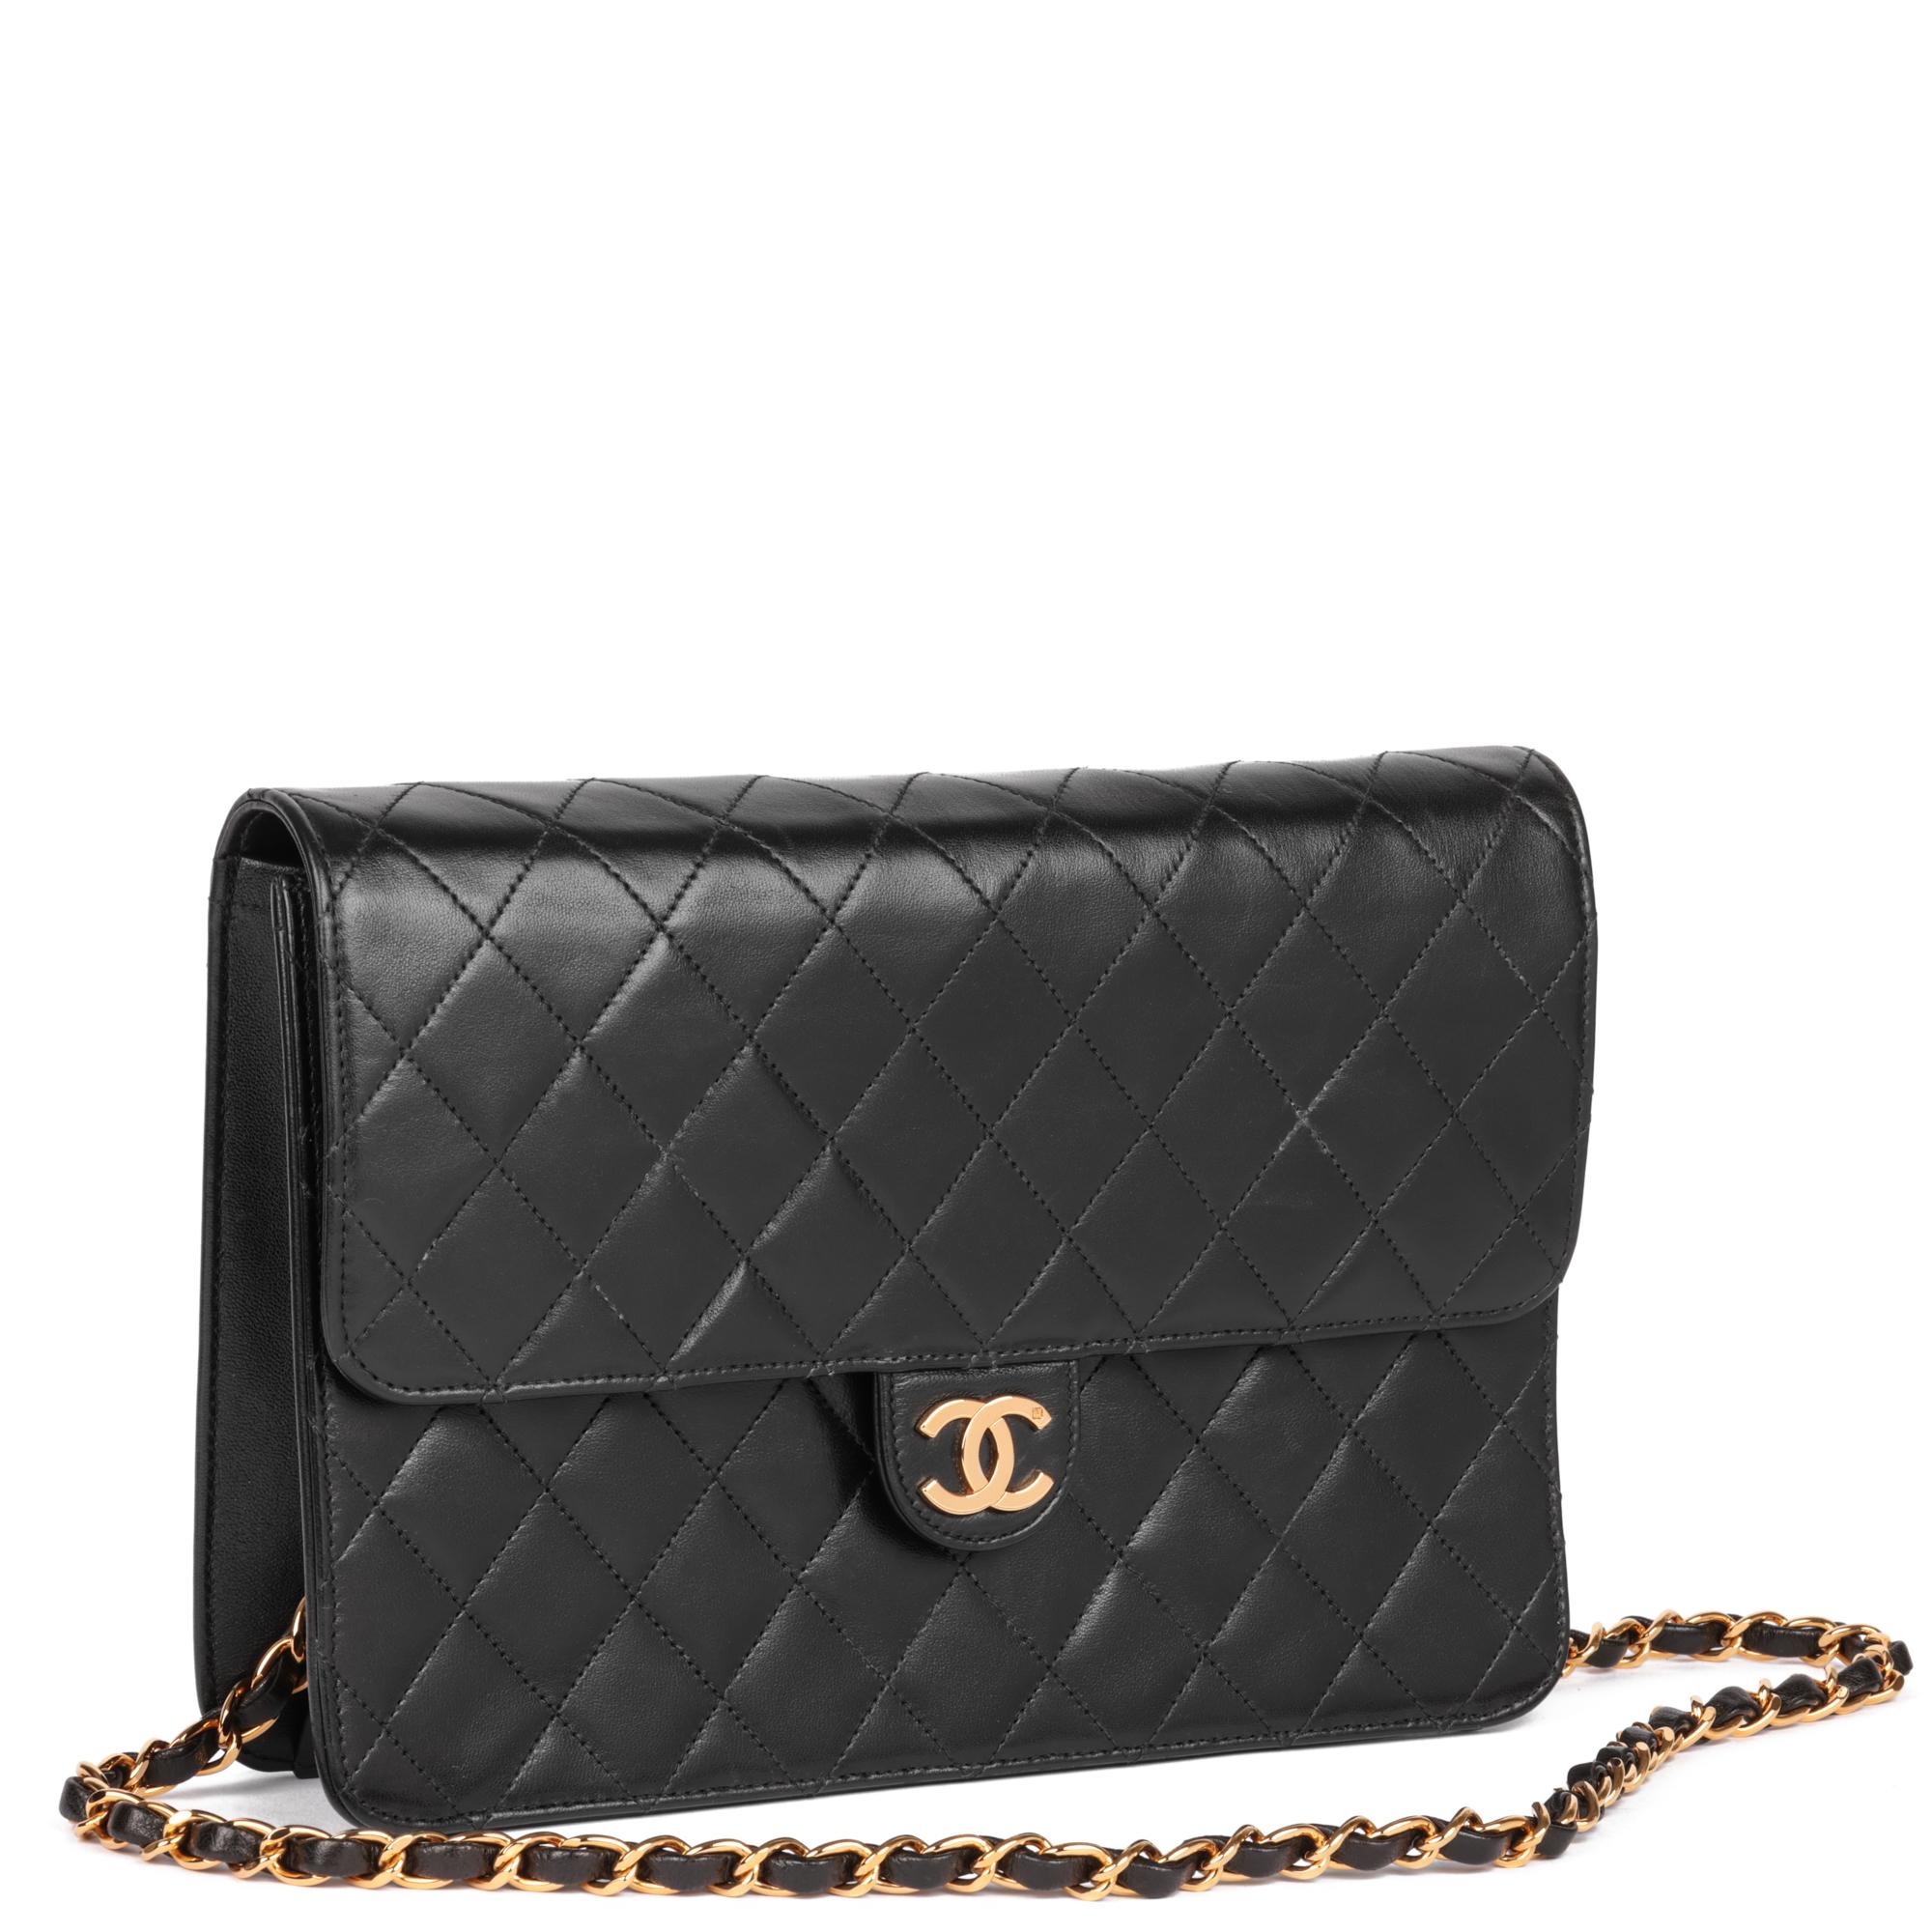 CHANEL
Black Quilted Lambskin Vintage Medium Classic Single Flap Bag

Xupes Reference: HB5224
Serial Number: 5426881
Age (Circa): 1997
Accompanied By: Chanel Dust Bag, Authenticity Card
Authenticity Details: Authenticity Card, Serial Sticker (Made